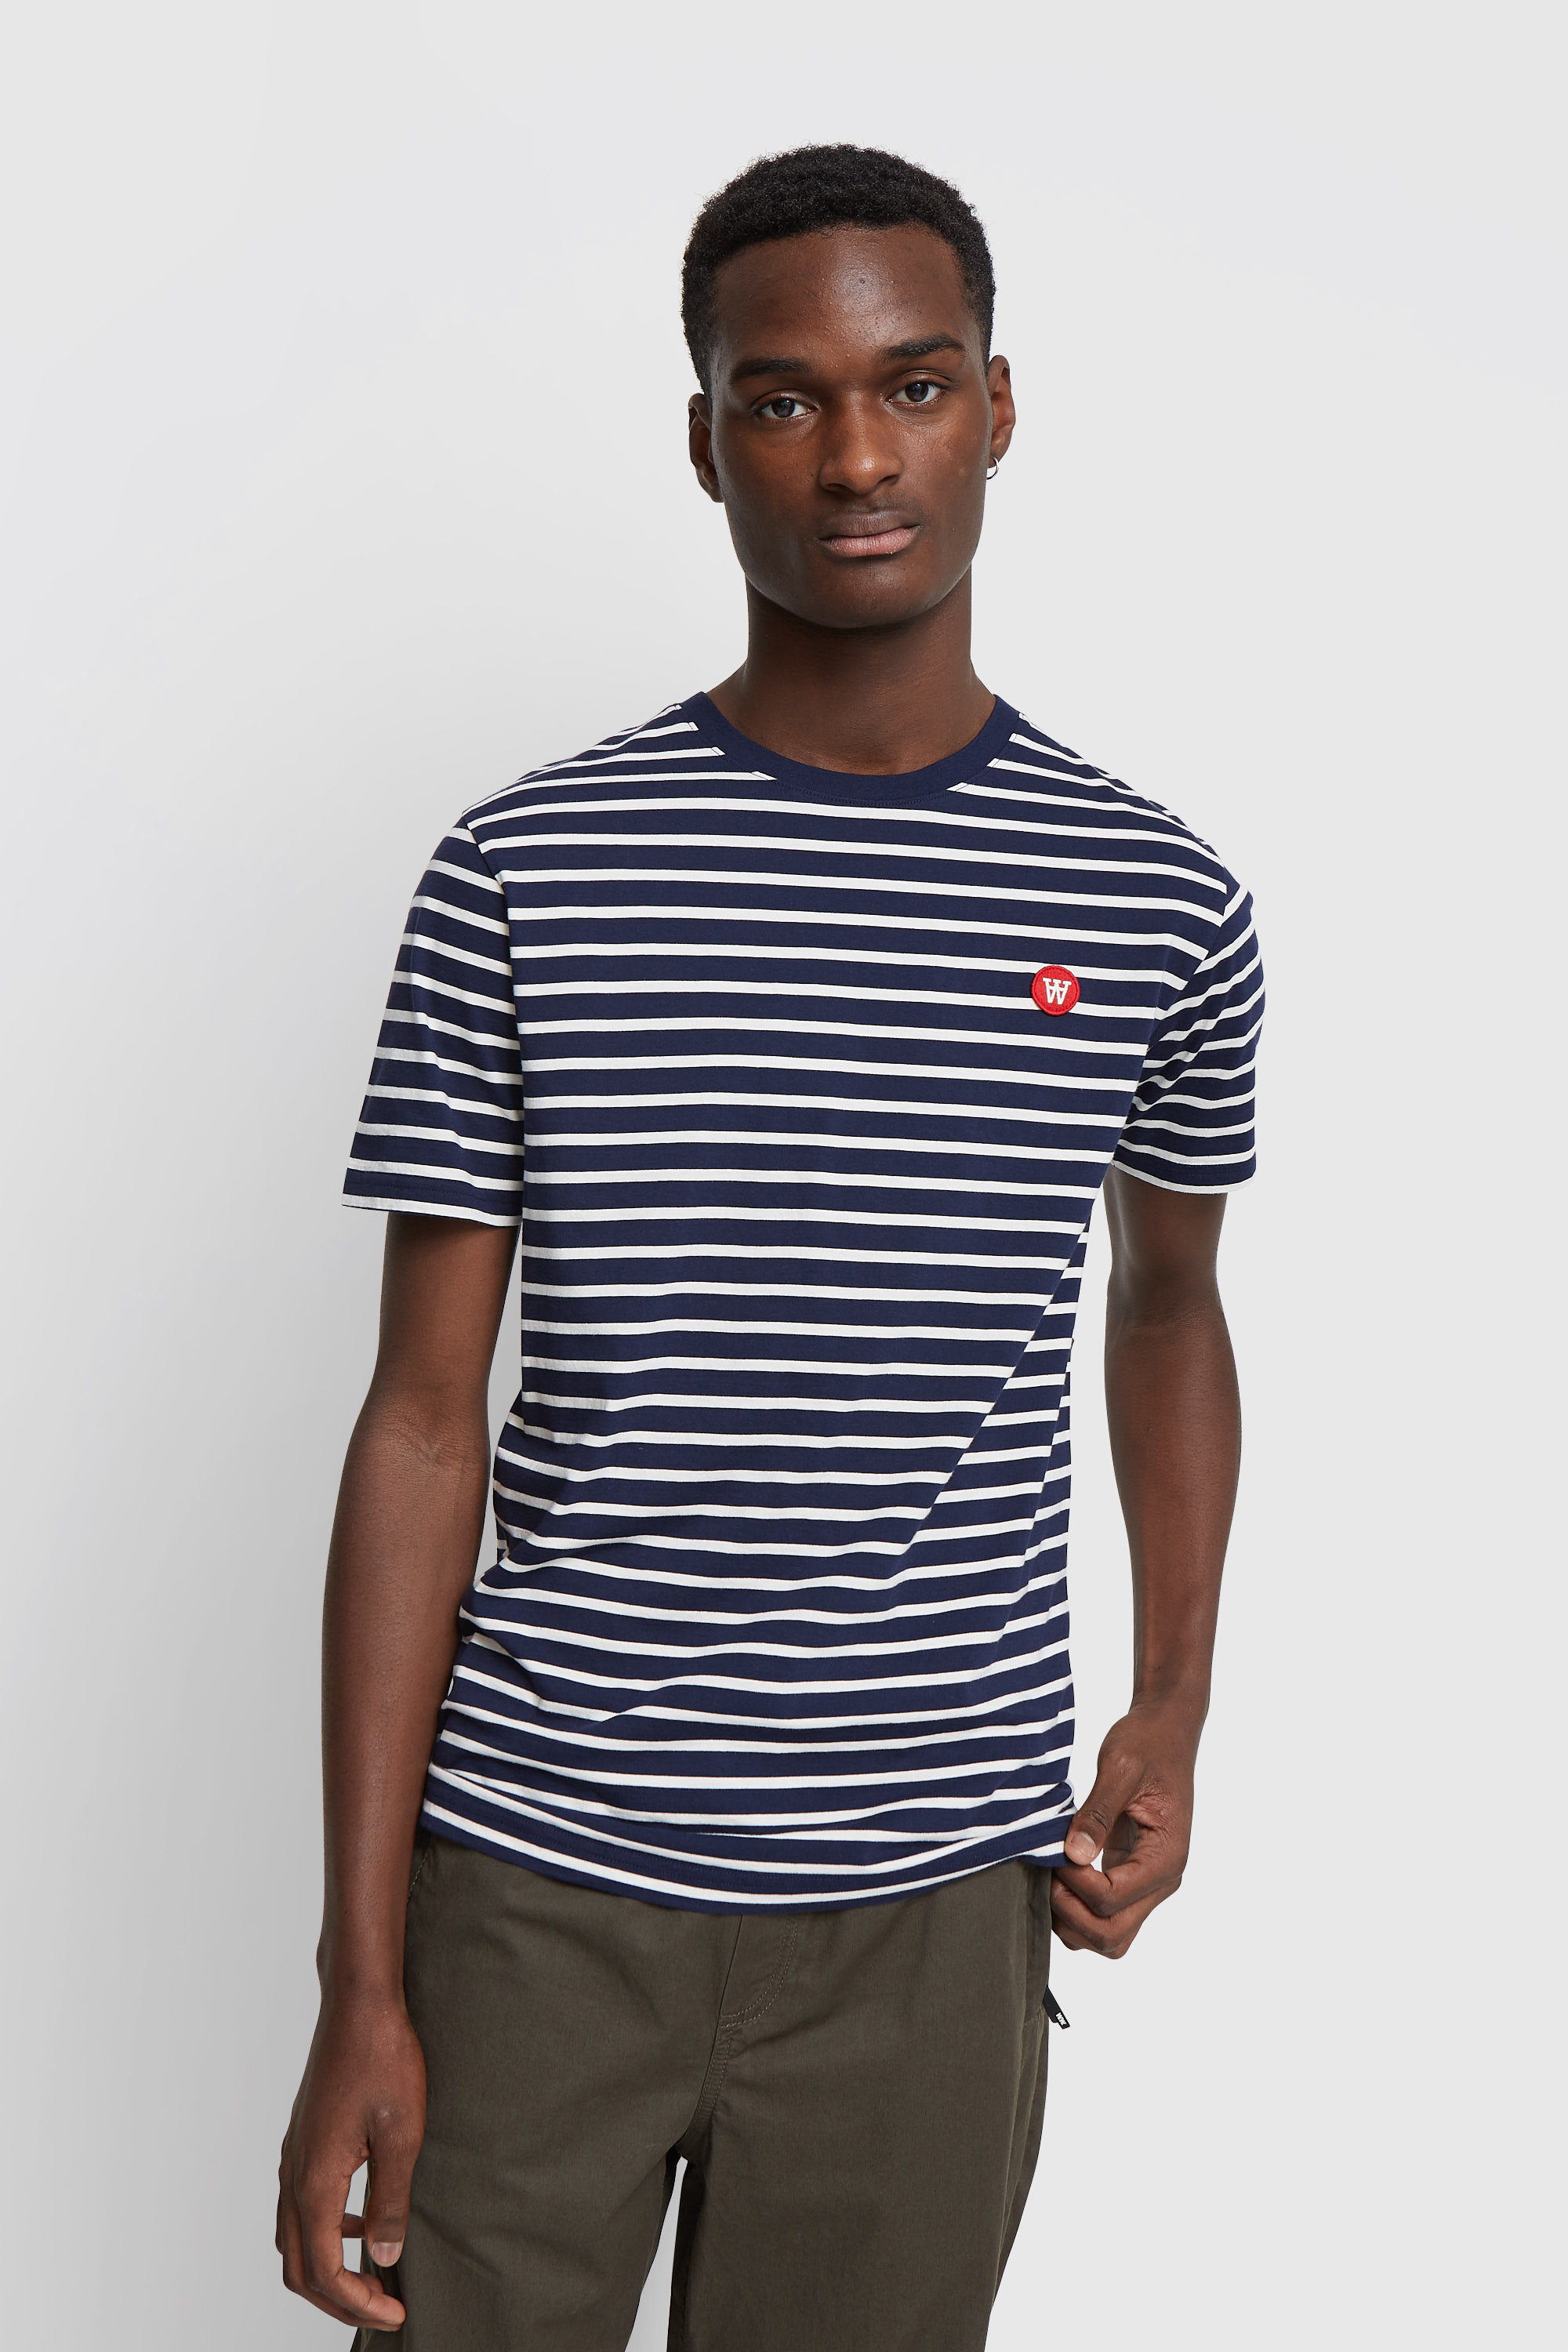 Double A by Wood Wood Ace T-shirt Navy/off-white stripes | WoodWood.com